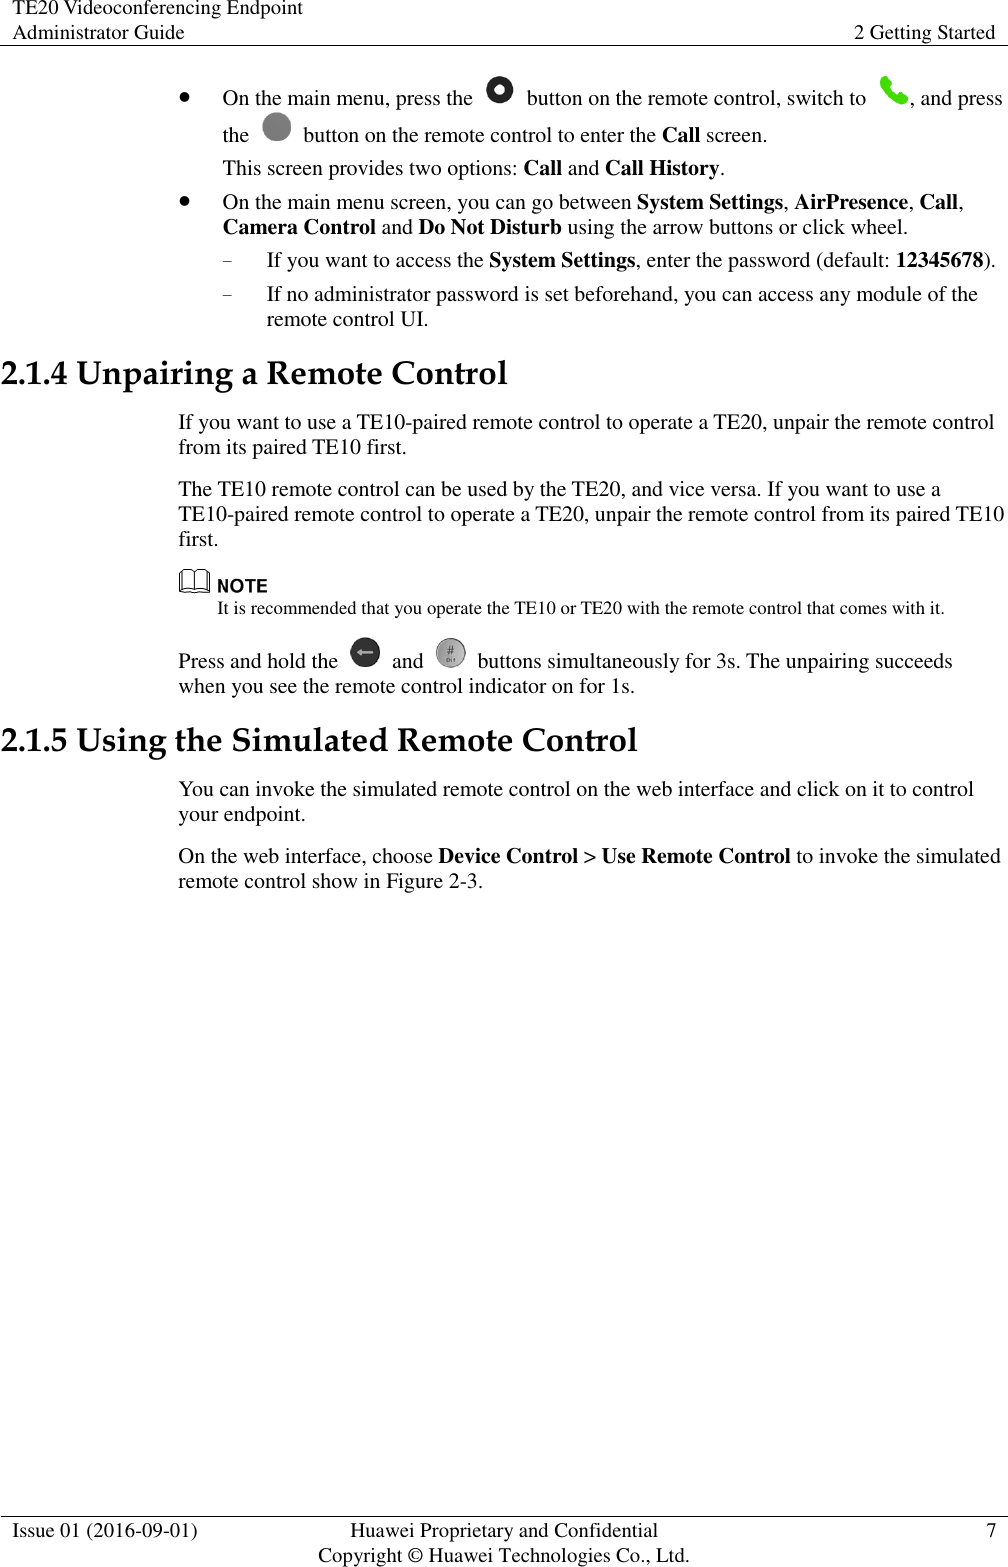 TE20 Videoconferencing Endpoint Administrator Guide 2 Getting Started  Issue 01 (2016-09-01) Huawei Proprietary and Confidential                                     Copyright © Huawei Technologies Co., Ltd. 7   On the main menu, press the    button on the remote control, switch to  , and press the    button on the remote control to enter the Call screen. This screen provides two options: Call and Call History.  On the main menu screen, you can go between System Settings, AirPresence, Call, Camera Control and Do Not Disturb using the arrow buttons or click wheel. − If you want to access the System Settings, enter the password (default: 12345678). − If no administrator password is set beforehand, you can access any module of the remote control UI. 2.1.4 Unpairing a Remote Control If you want to use a TE10-paired remote control to operate a TE20, unpair the remote control from its paired TE10 first. The TE10 remote control can be used by the TE20, and vice versa. If you want to use a TE10-paired remote control to operate a TE20, unpair the remote control from its paired TE10 first.  It is recommended that you operate the TE10 or TE20 with the remote control that comes with it. Press and hold the    and    buttons simultaneously for 3s. The unpairing succeeds when you see the remote control indicator on for 1s. 2.1.5 Using the Simulated Remote Control You can invoke the simulated remote control on the web interface and click on it to control your endpoint. On the web interface, choose Device Control &gt; Use Remote Control to invoke the simulated remote control show in Figure 2-3. 